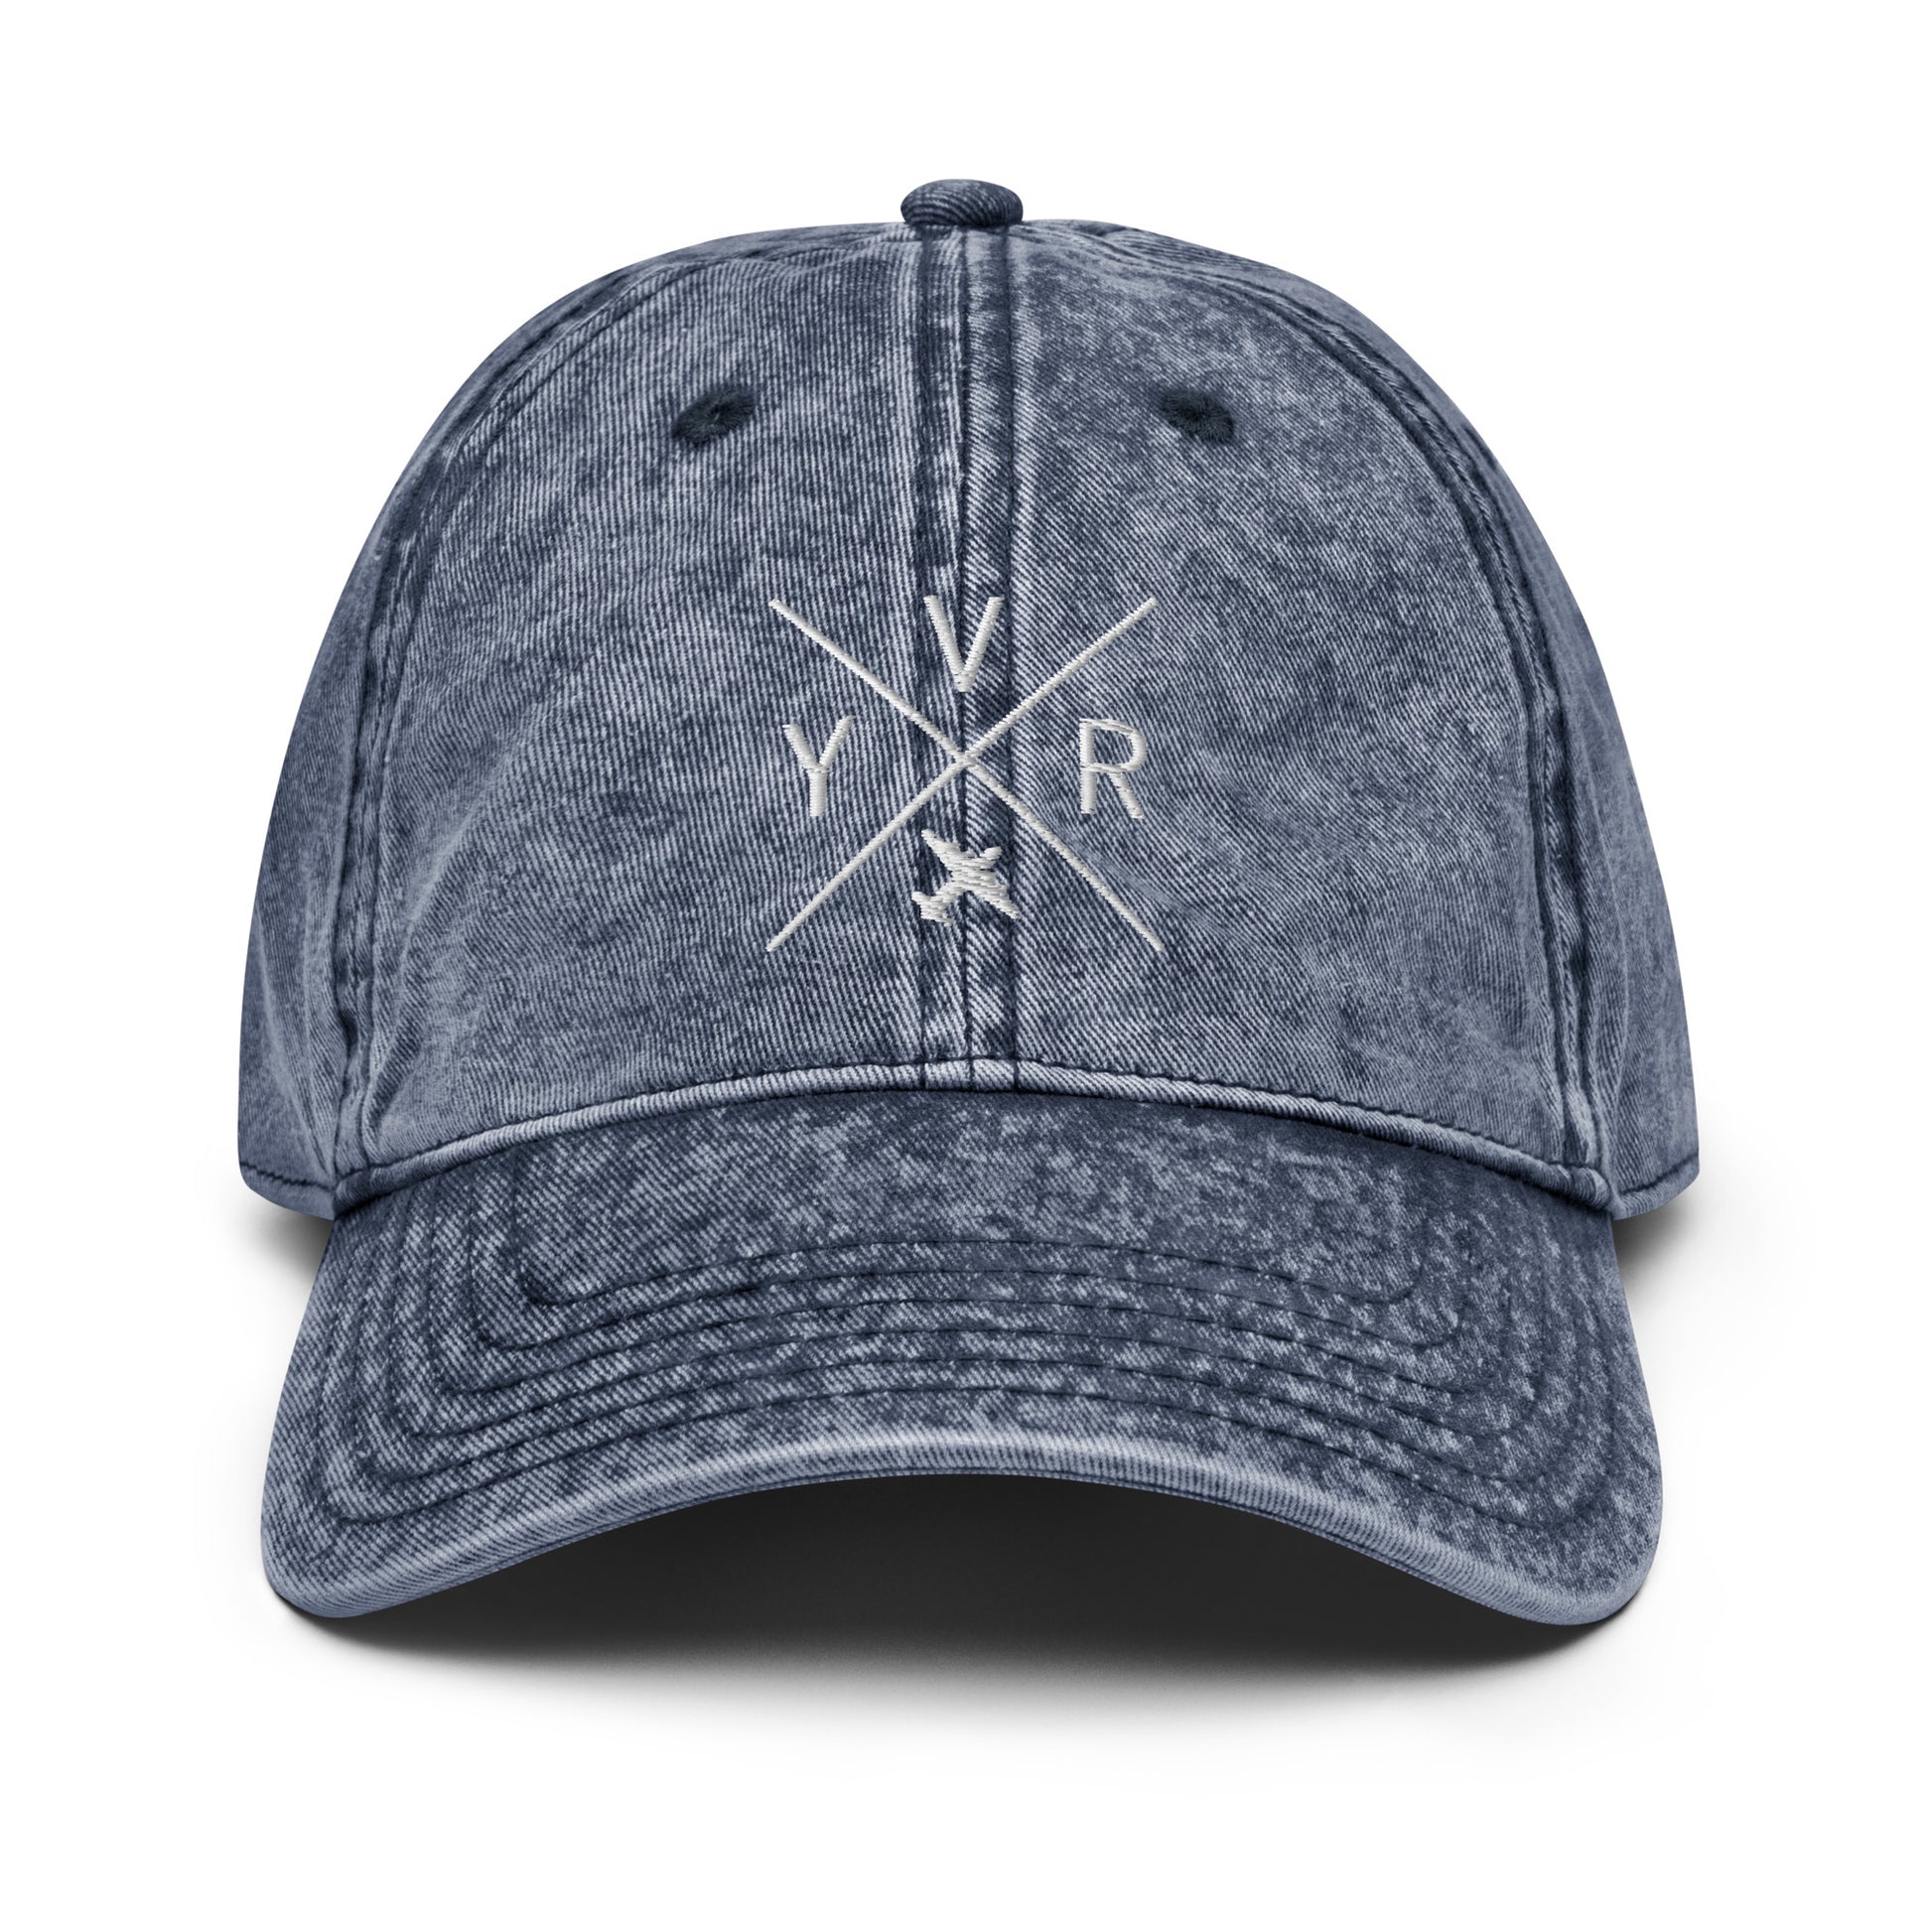 Crossed-X Cotton Twill Cap - White • YVR Vancouver • YHM Designs - Image 19